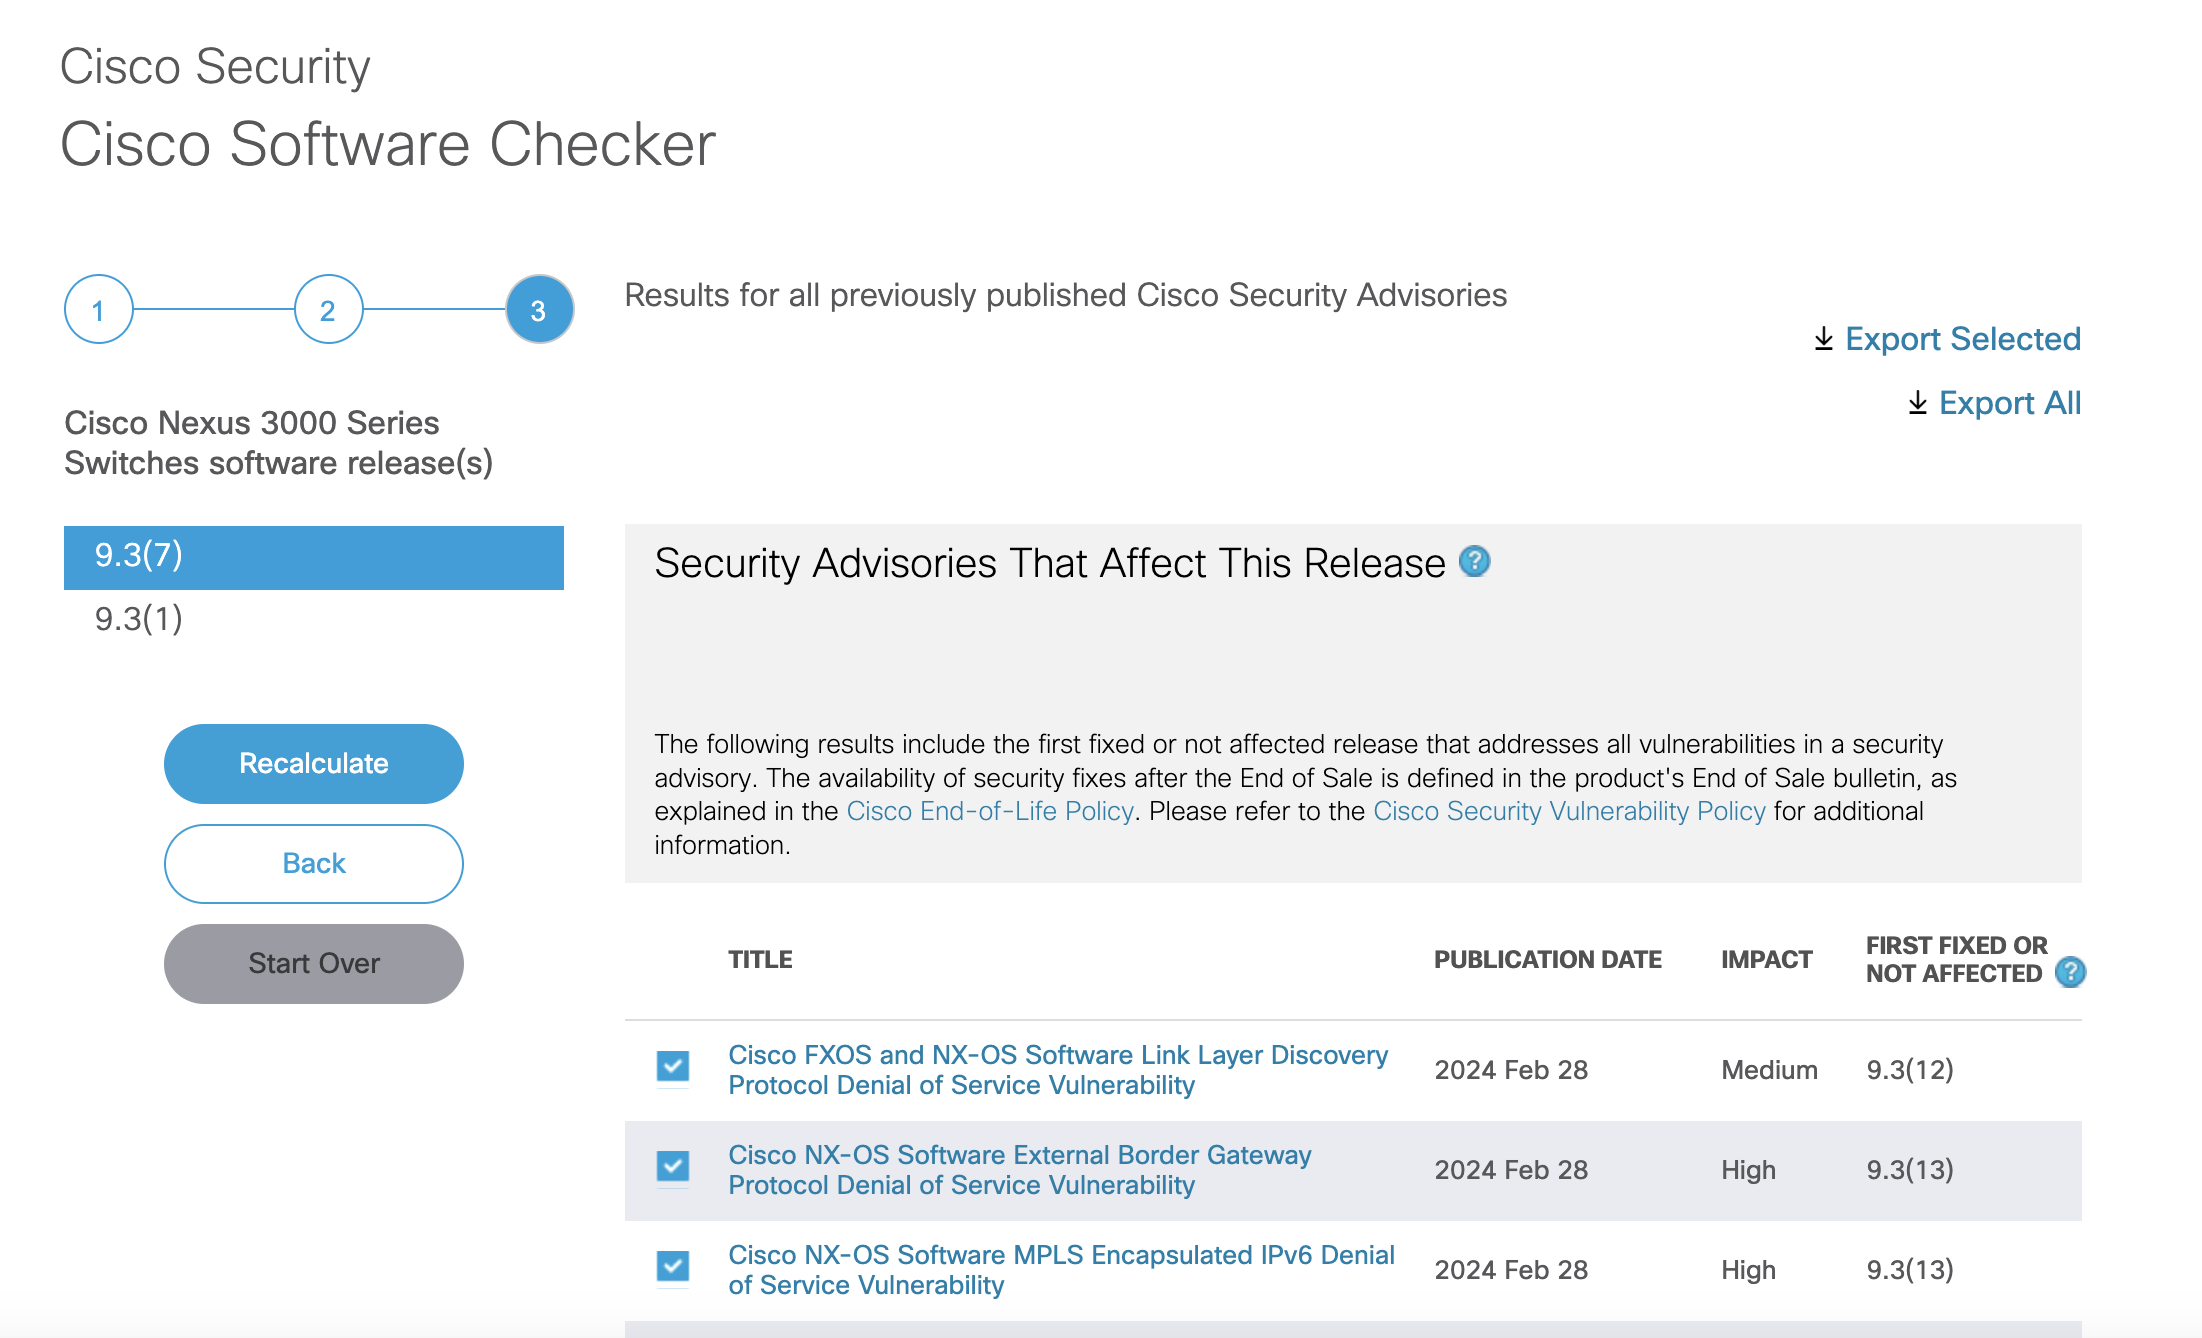 Screenshot of the Cisco Software Checker tool displaying a list of security advisories for Cisco Nexus 3000 Series Switches software releases.